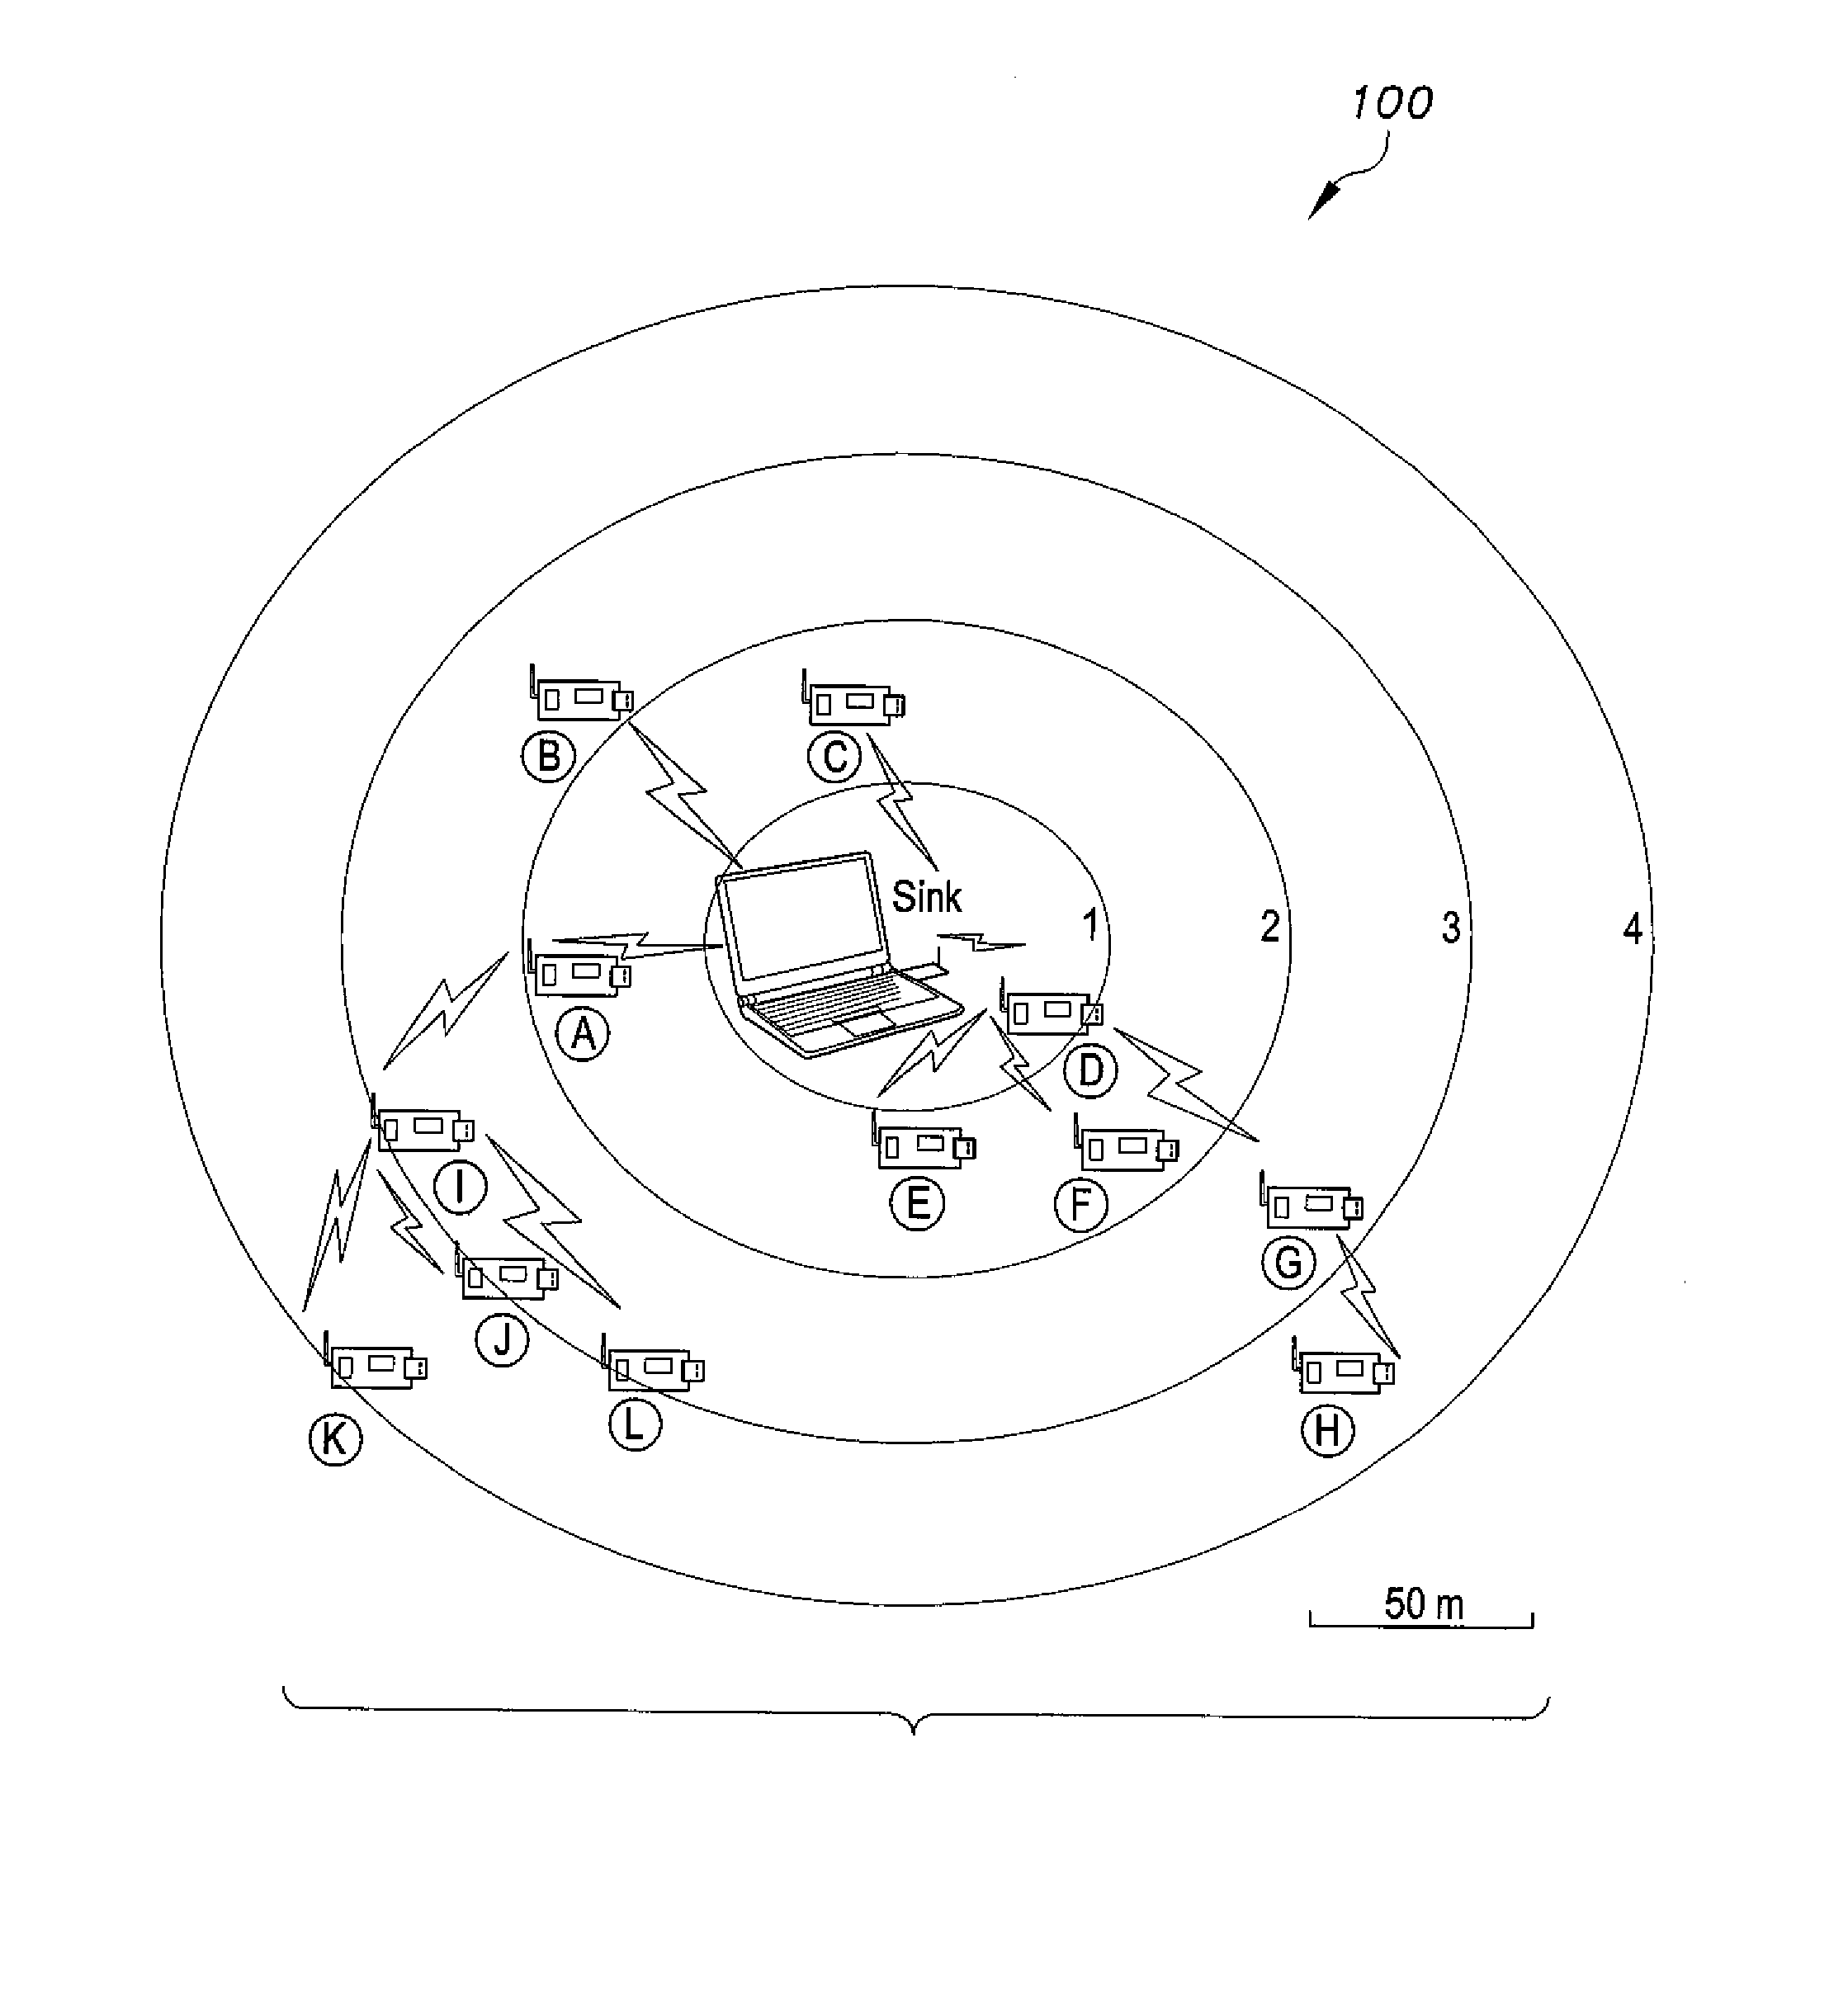 Coverage, connectivity and communication (C3) protocol method for wireless sensor networks